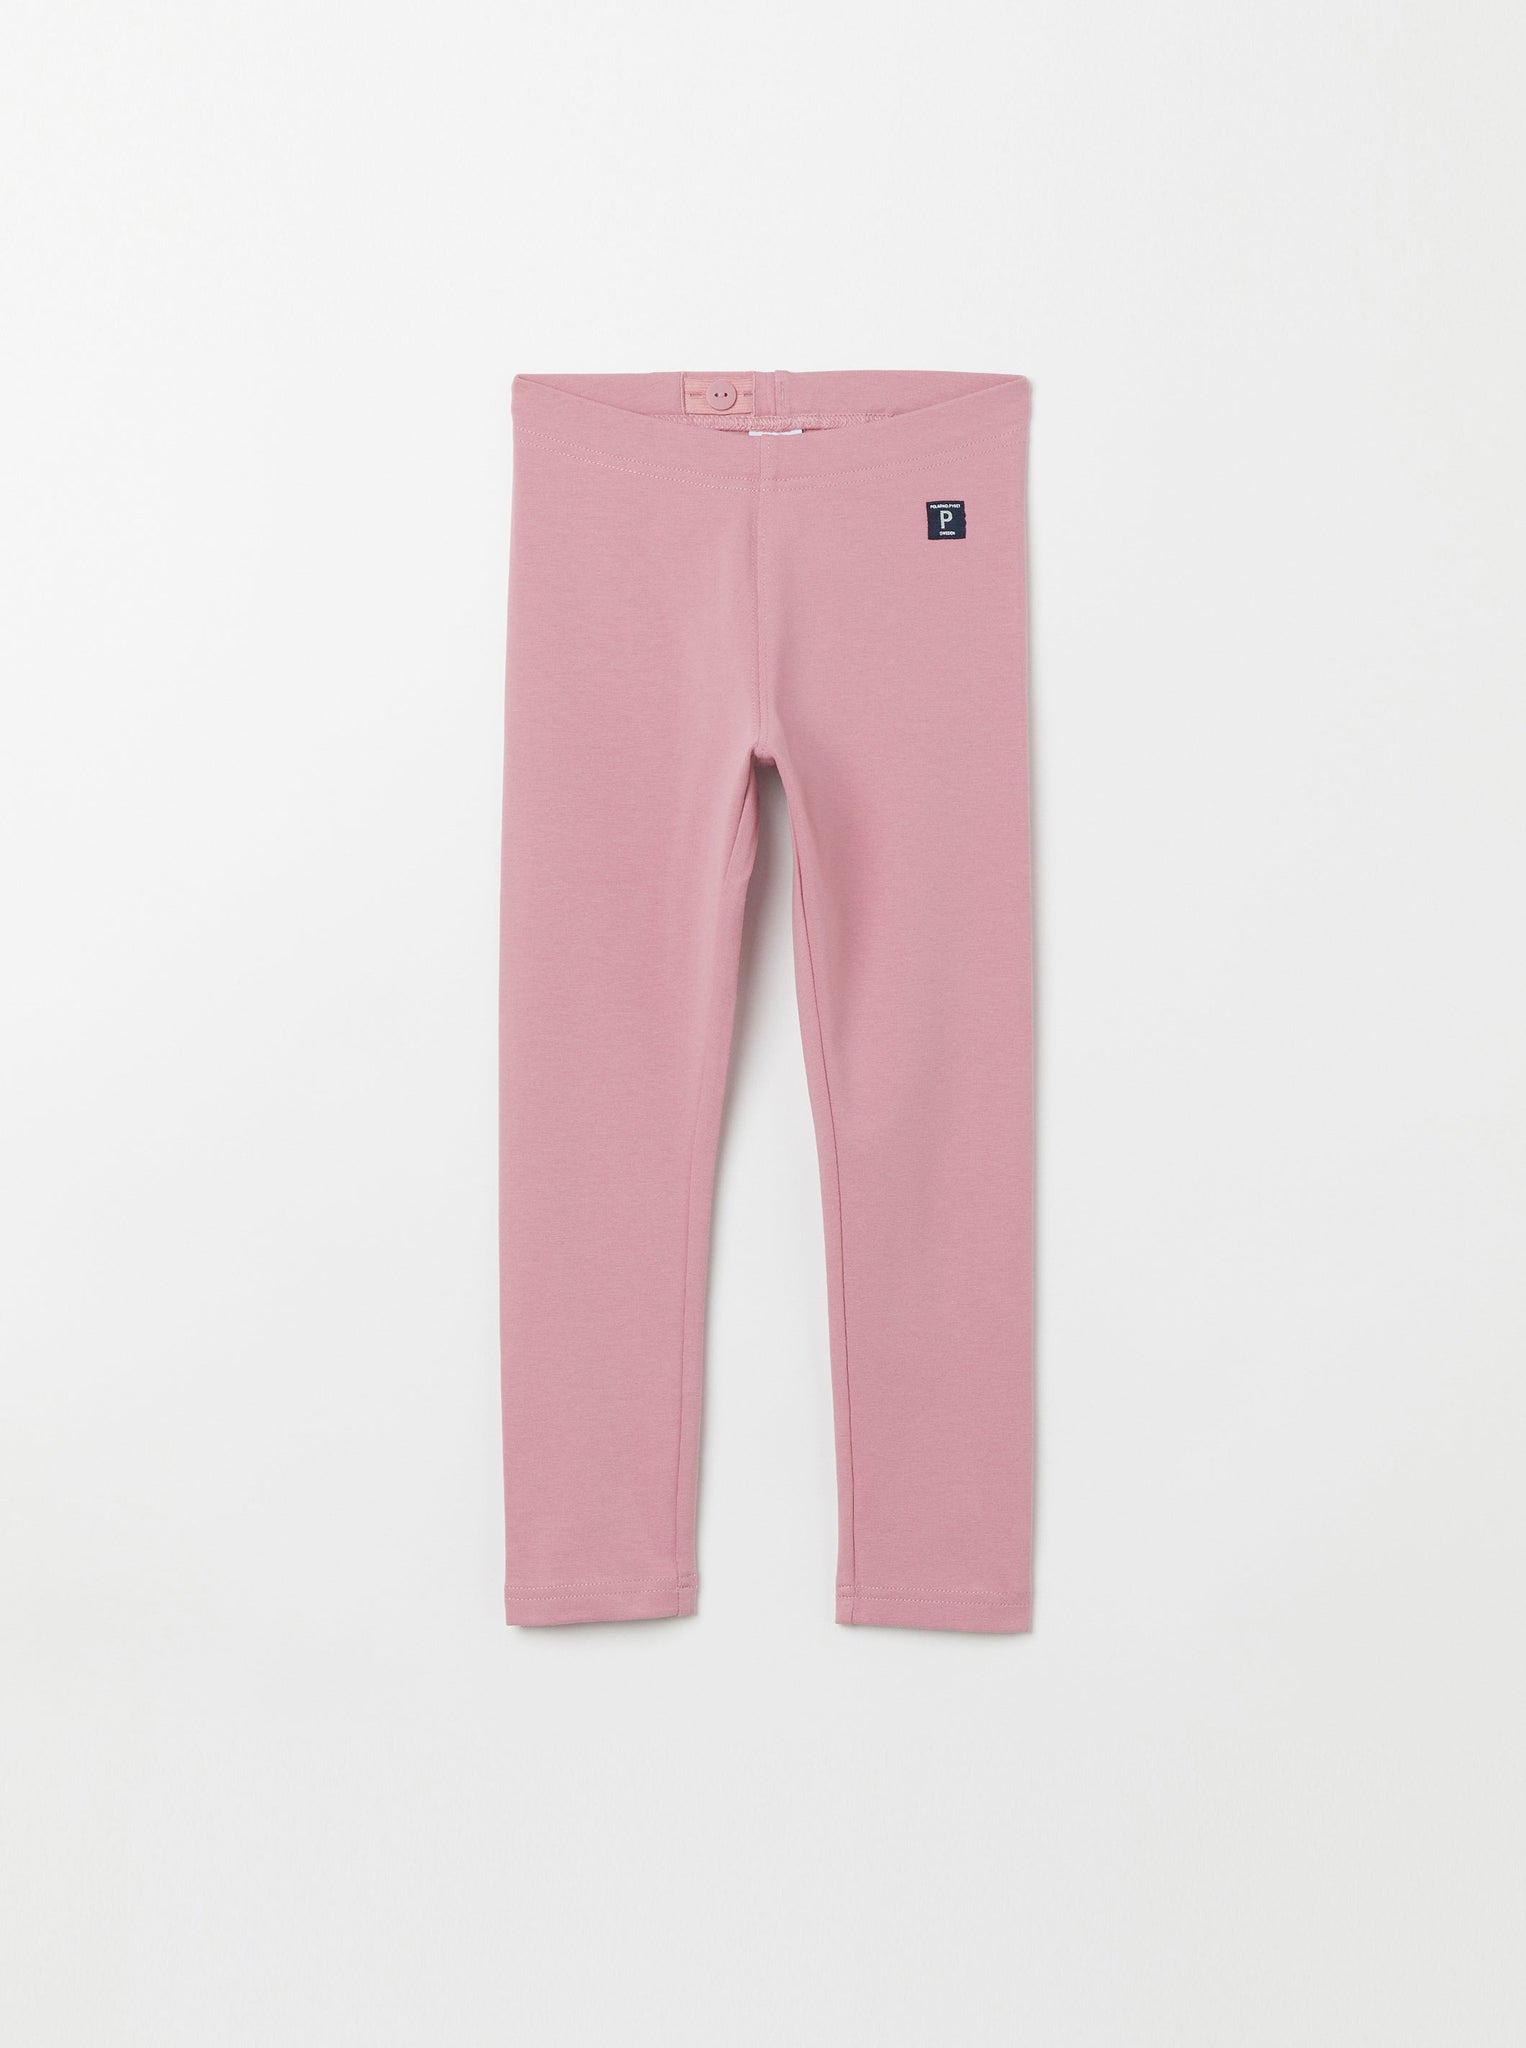 Organic Cotton Pink Kids Leggings from the Polarn O. Pyret Kidswear collection. Nordic kids clothes made from sustainable sources.